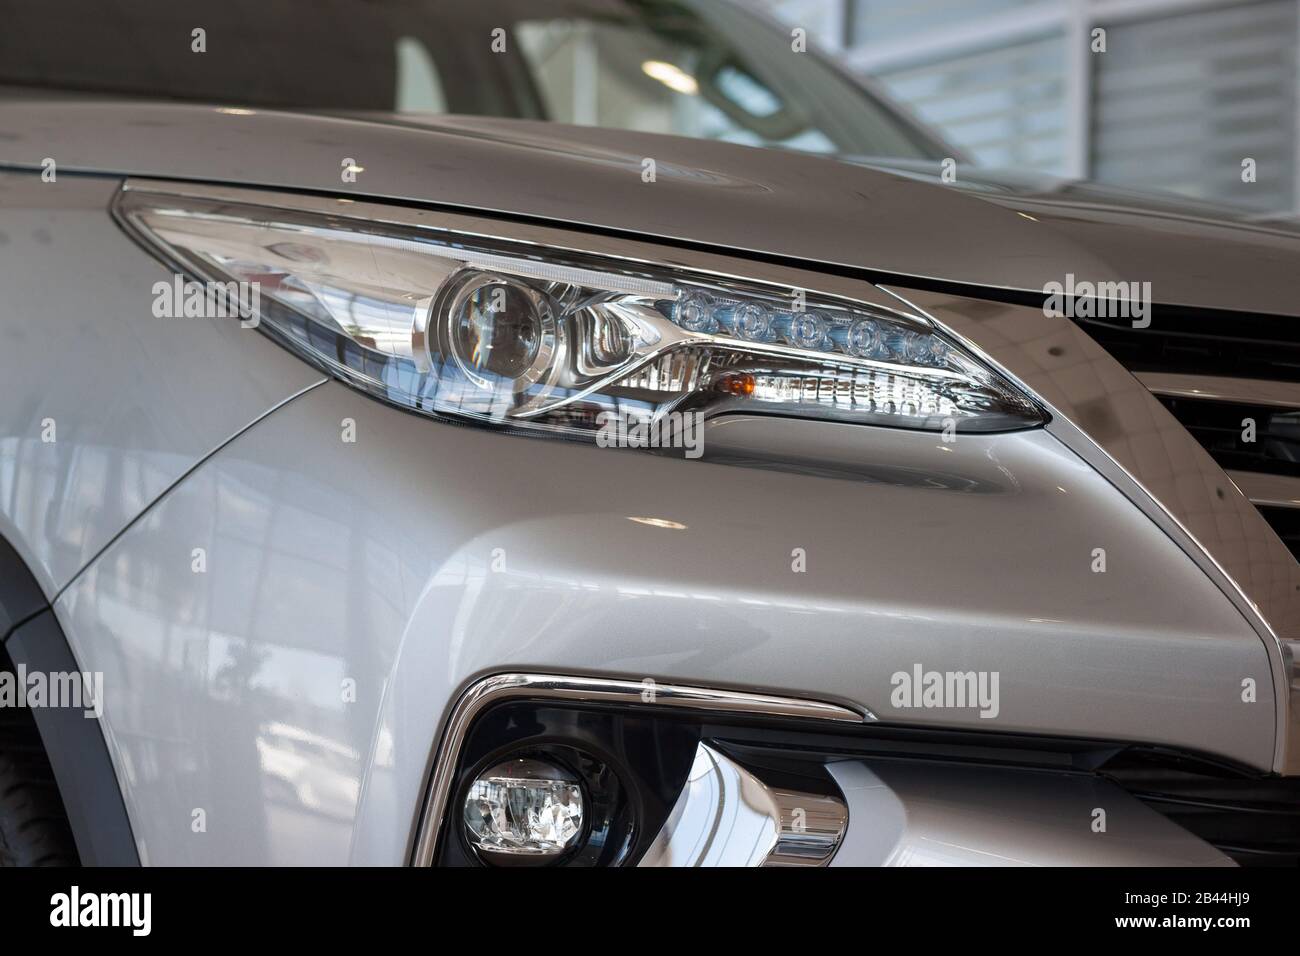 New modern vehicle with elegant head lamps in showroom. Side view. Stock Photo